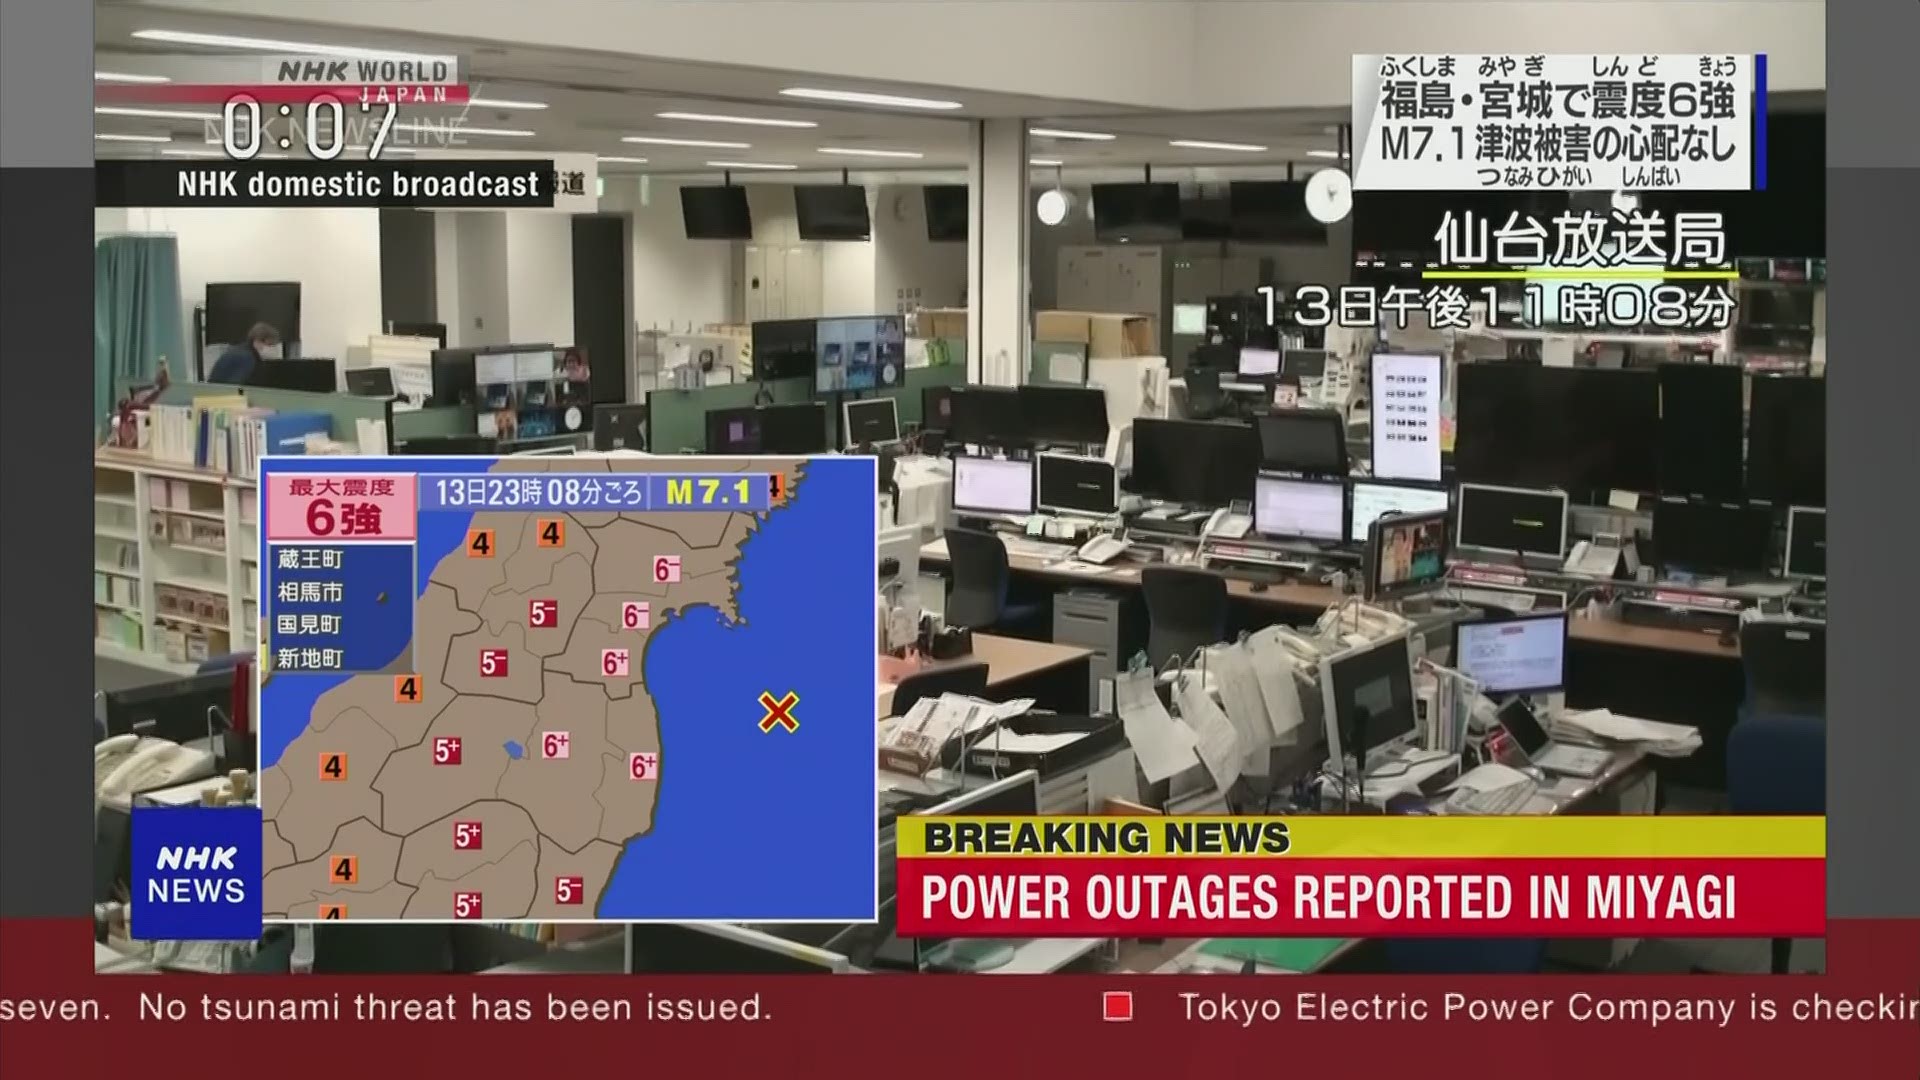 The Japan Meteorological Agency said a strong earthquake hit off the coast of northeastern Japan on Saturday, shaking Fukushima, Miyagi and other areas.